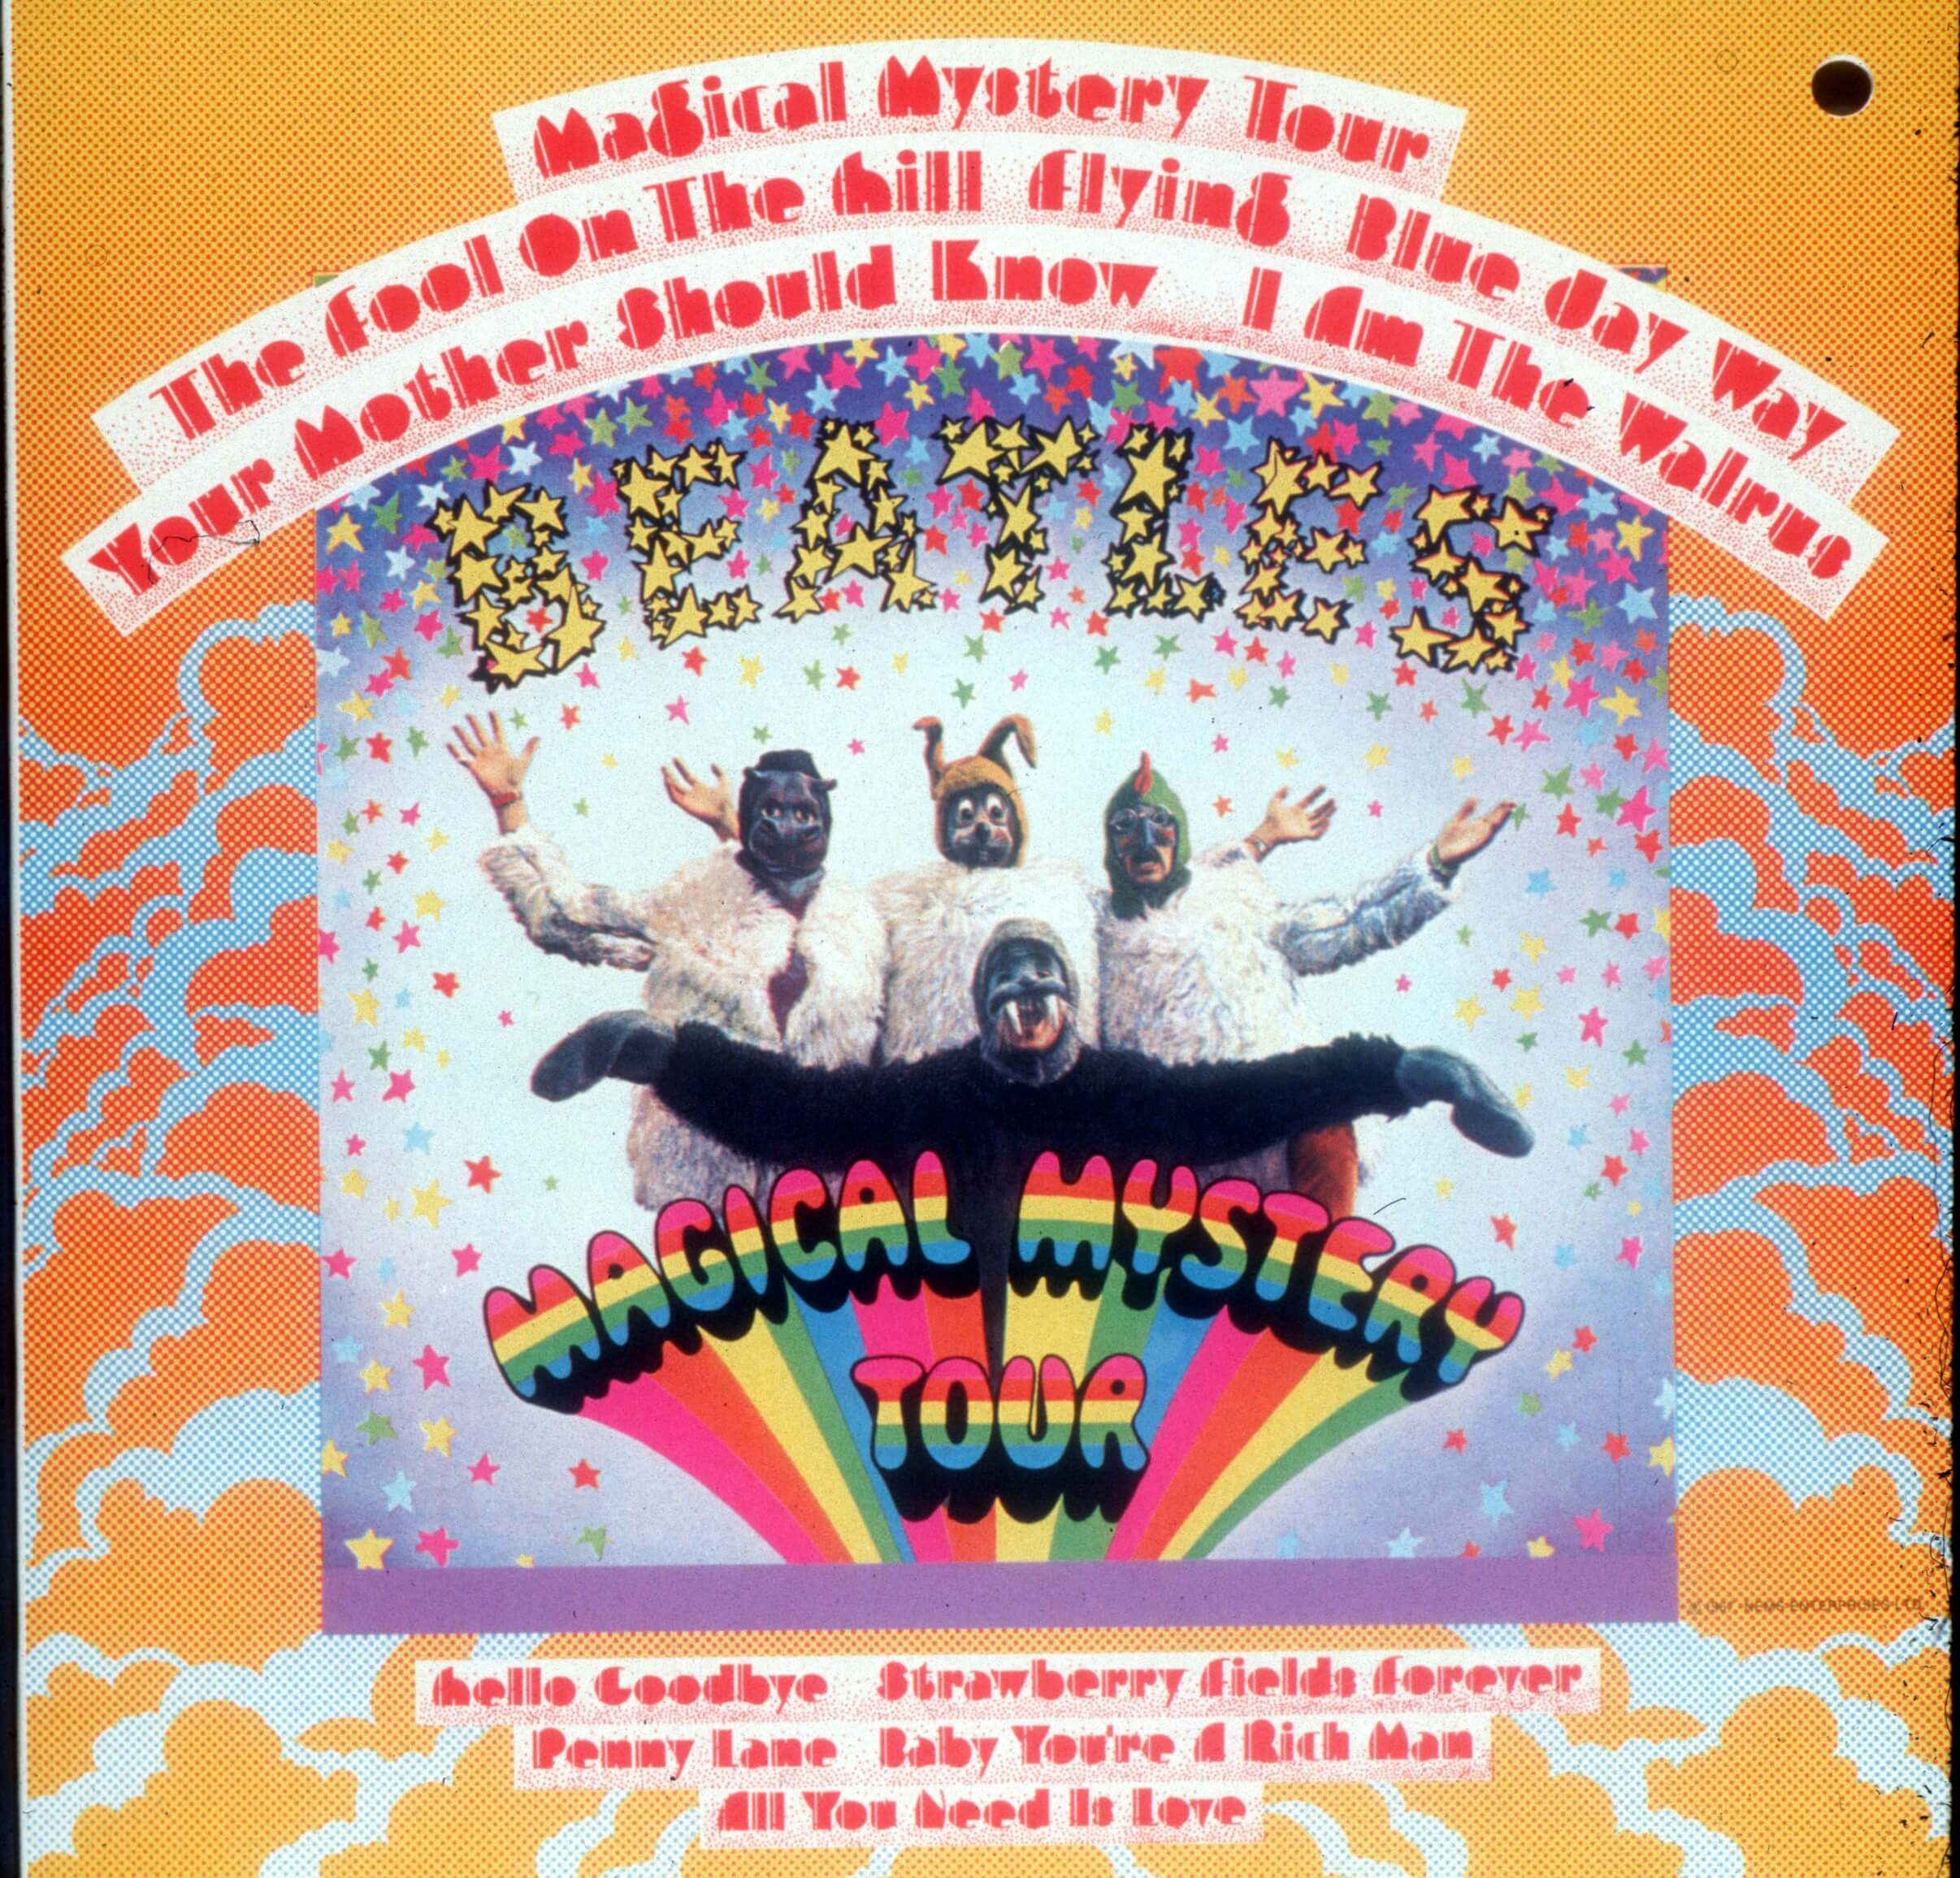 A vinyl copy of The Beatles' 'Magical Mystery Tour'